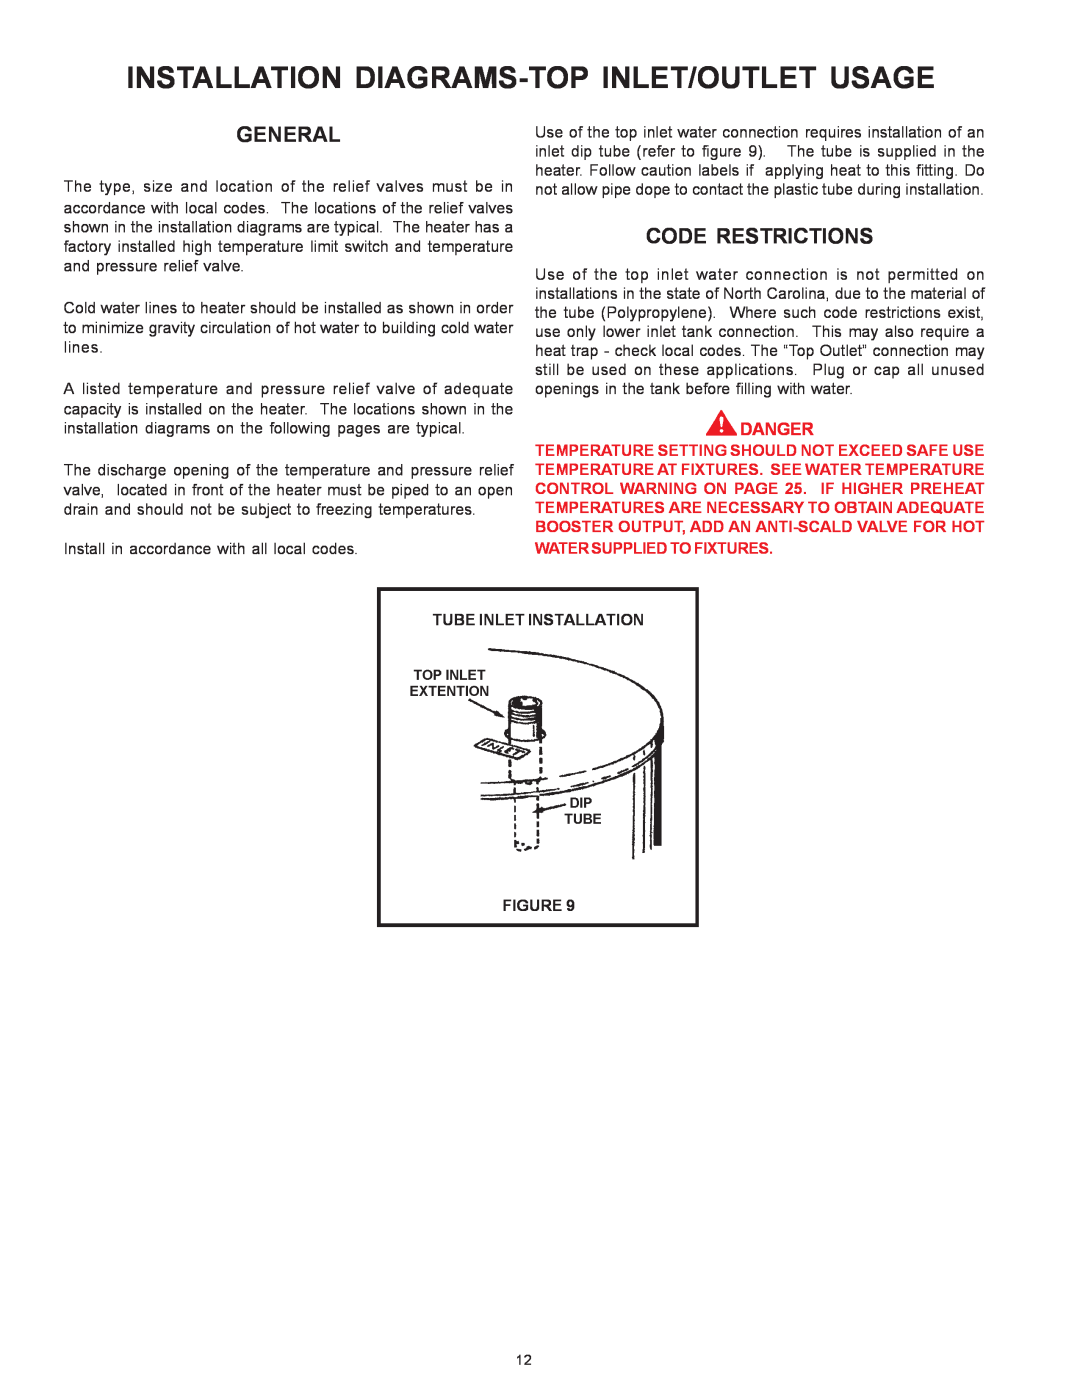 State Industries SBN85390NE/A warranty Installation Diagrams-Top Inlet/Outlet Usage, General, Code Restrictions, Danger 